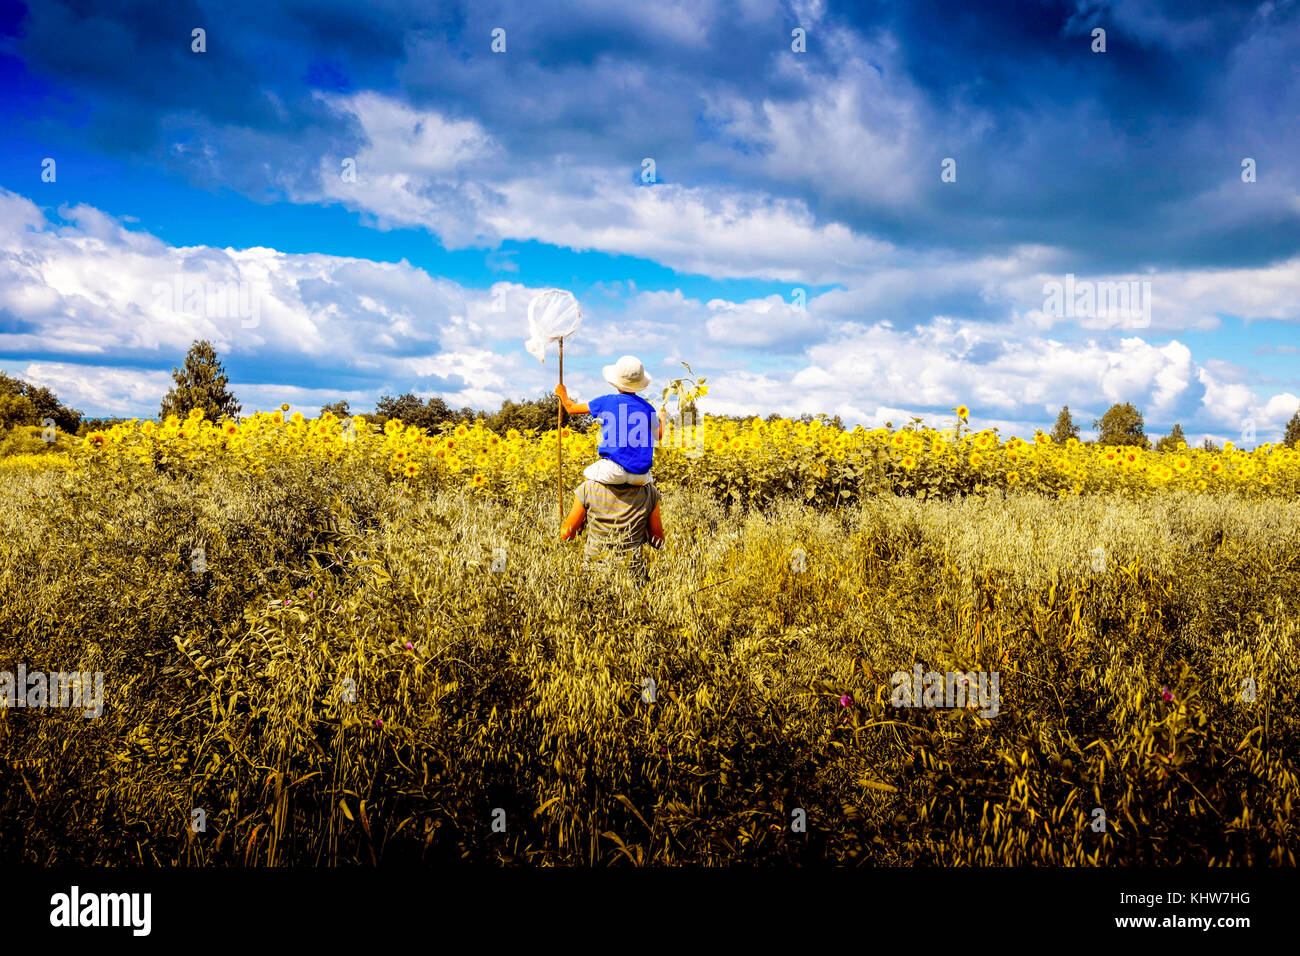 Father carrying son on shoulders, walking through field of sunflowers,  rear view, Ural, Sverdlovsk, Russia, Europe Stock Photo